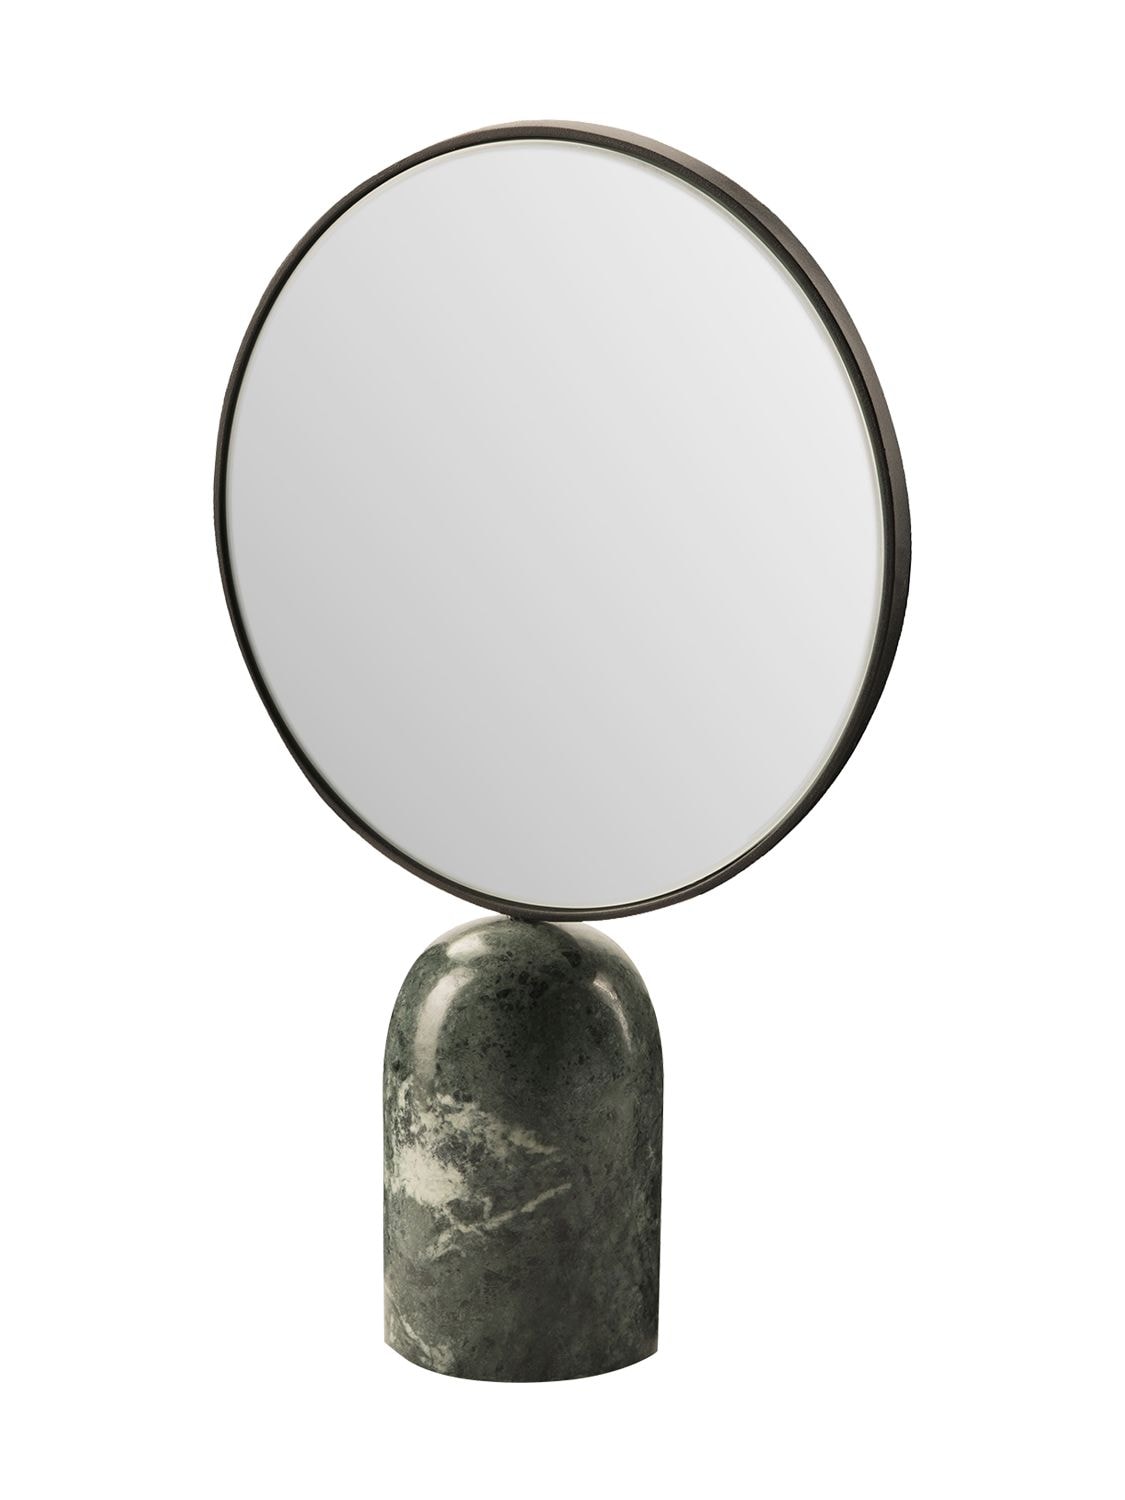 Image of Round Mirror W/ Green Marble